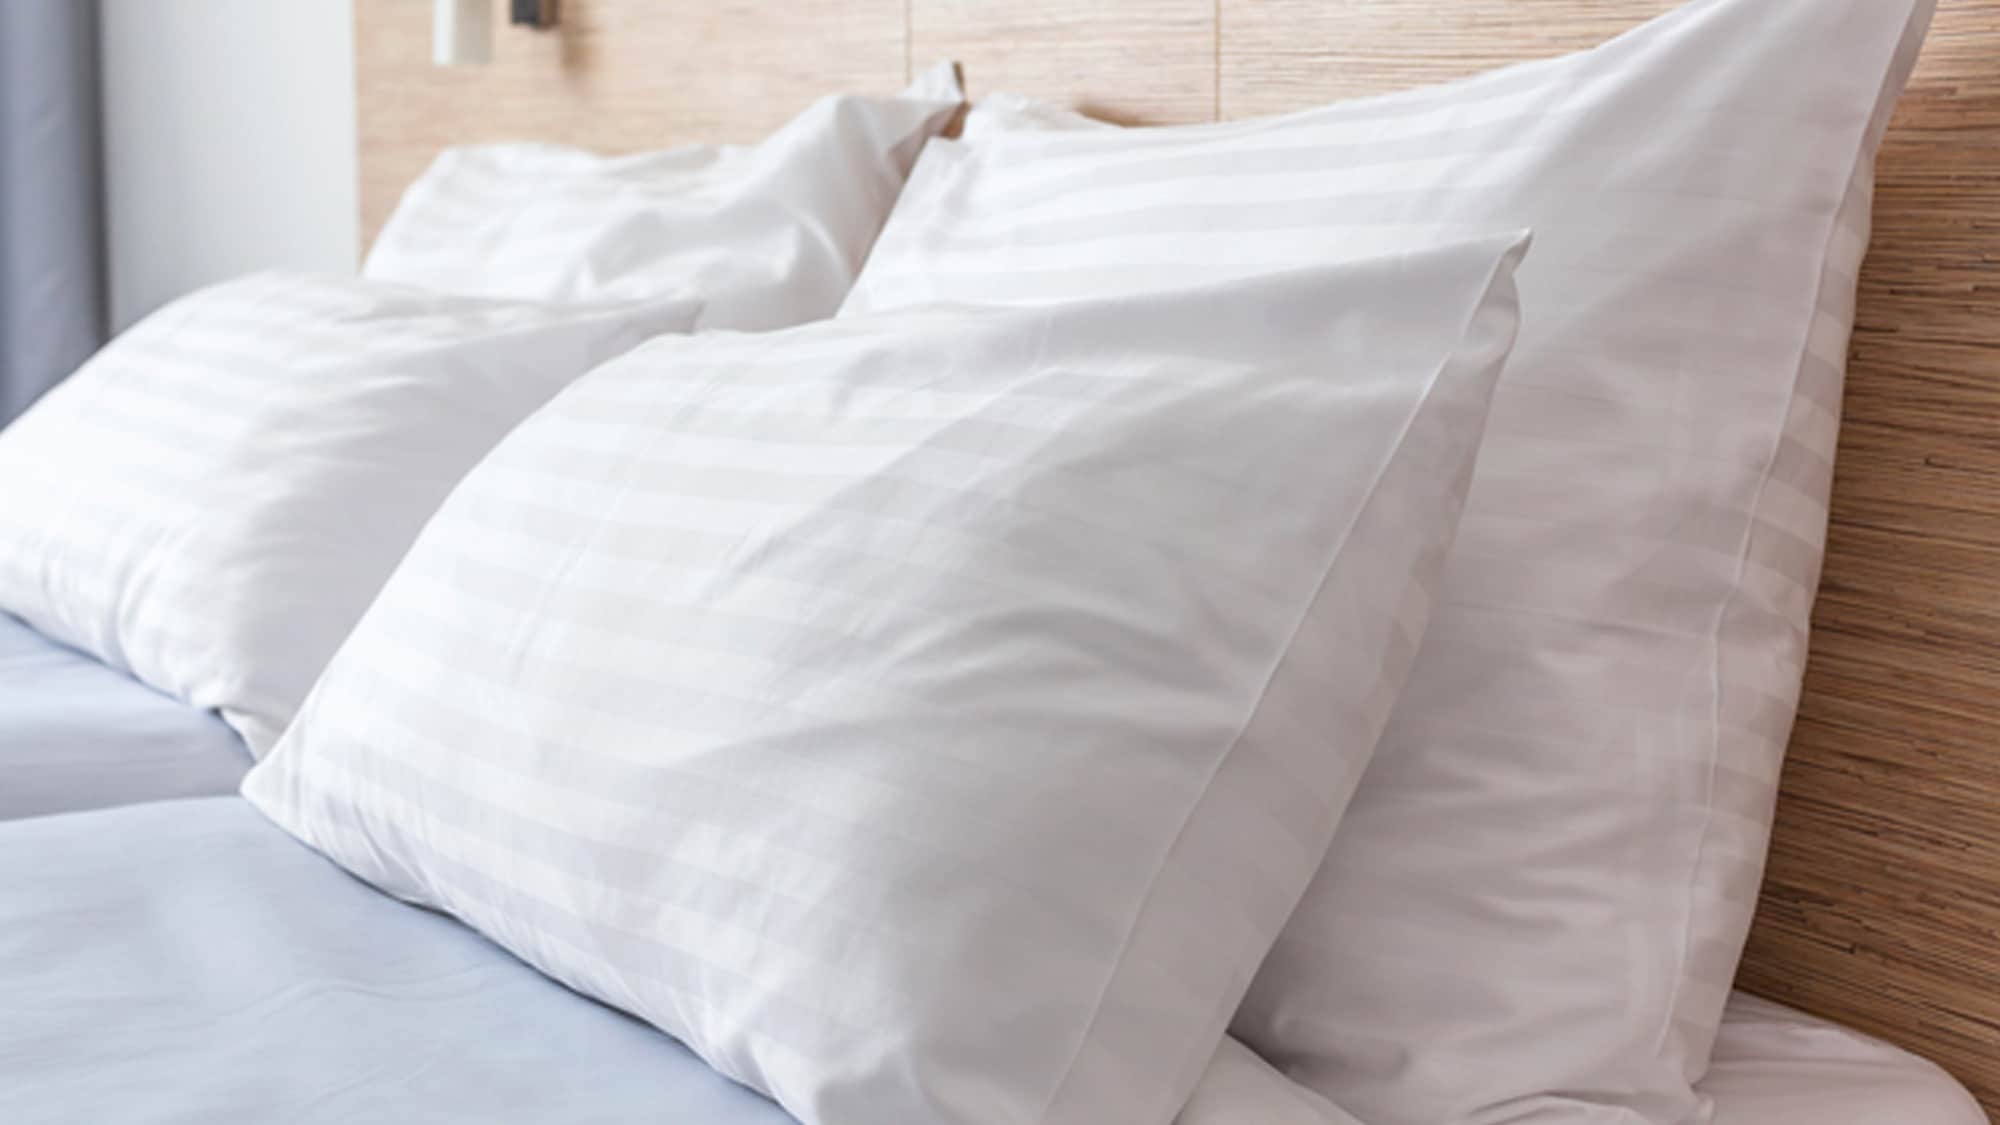 Beds are proud of "the b" all over the country. Excellent sleeping comfort with a high-quality mattress and duvet